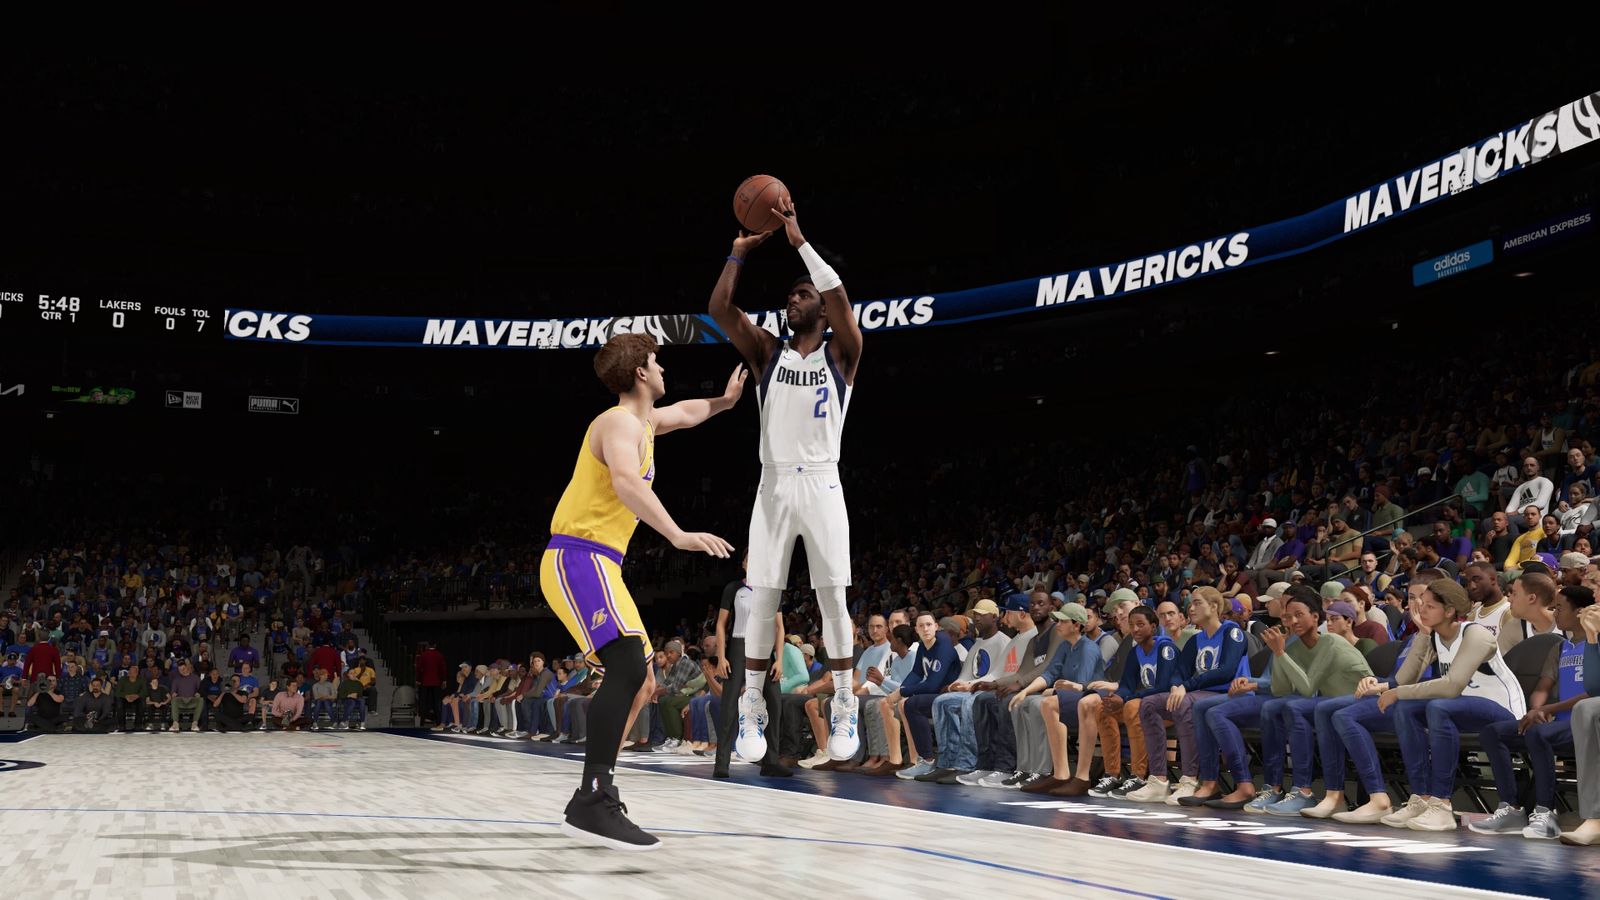 Kyrie Irving of the Dallas Mavericks attempting a 3-point shot in NBA 2K23